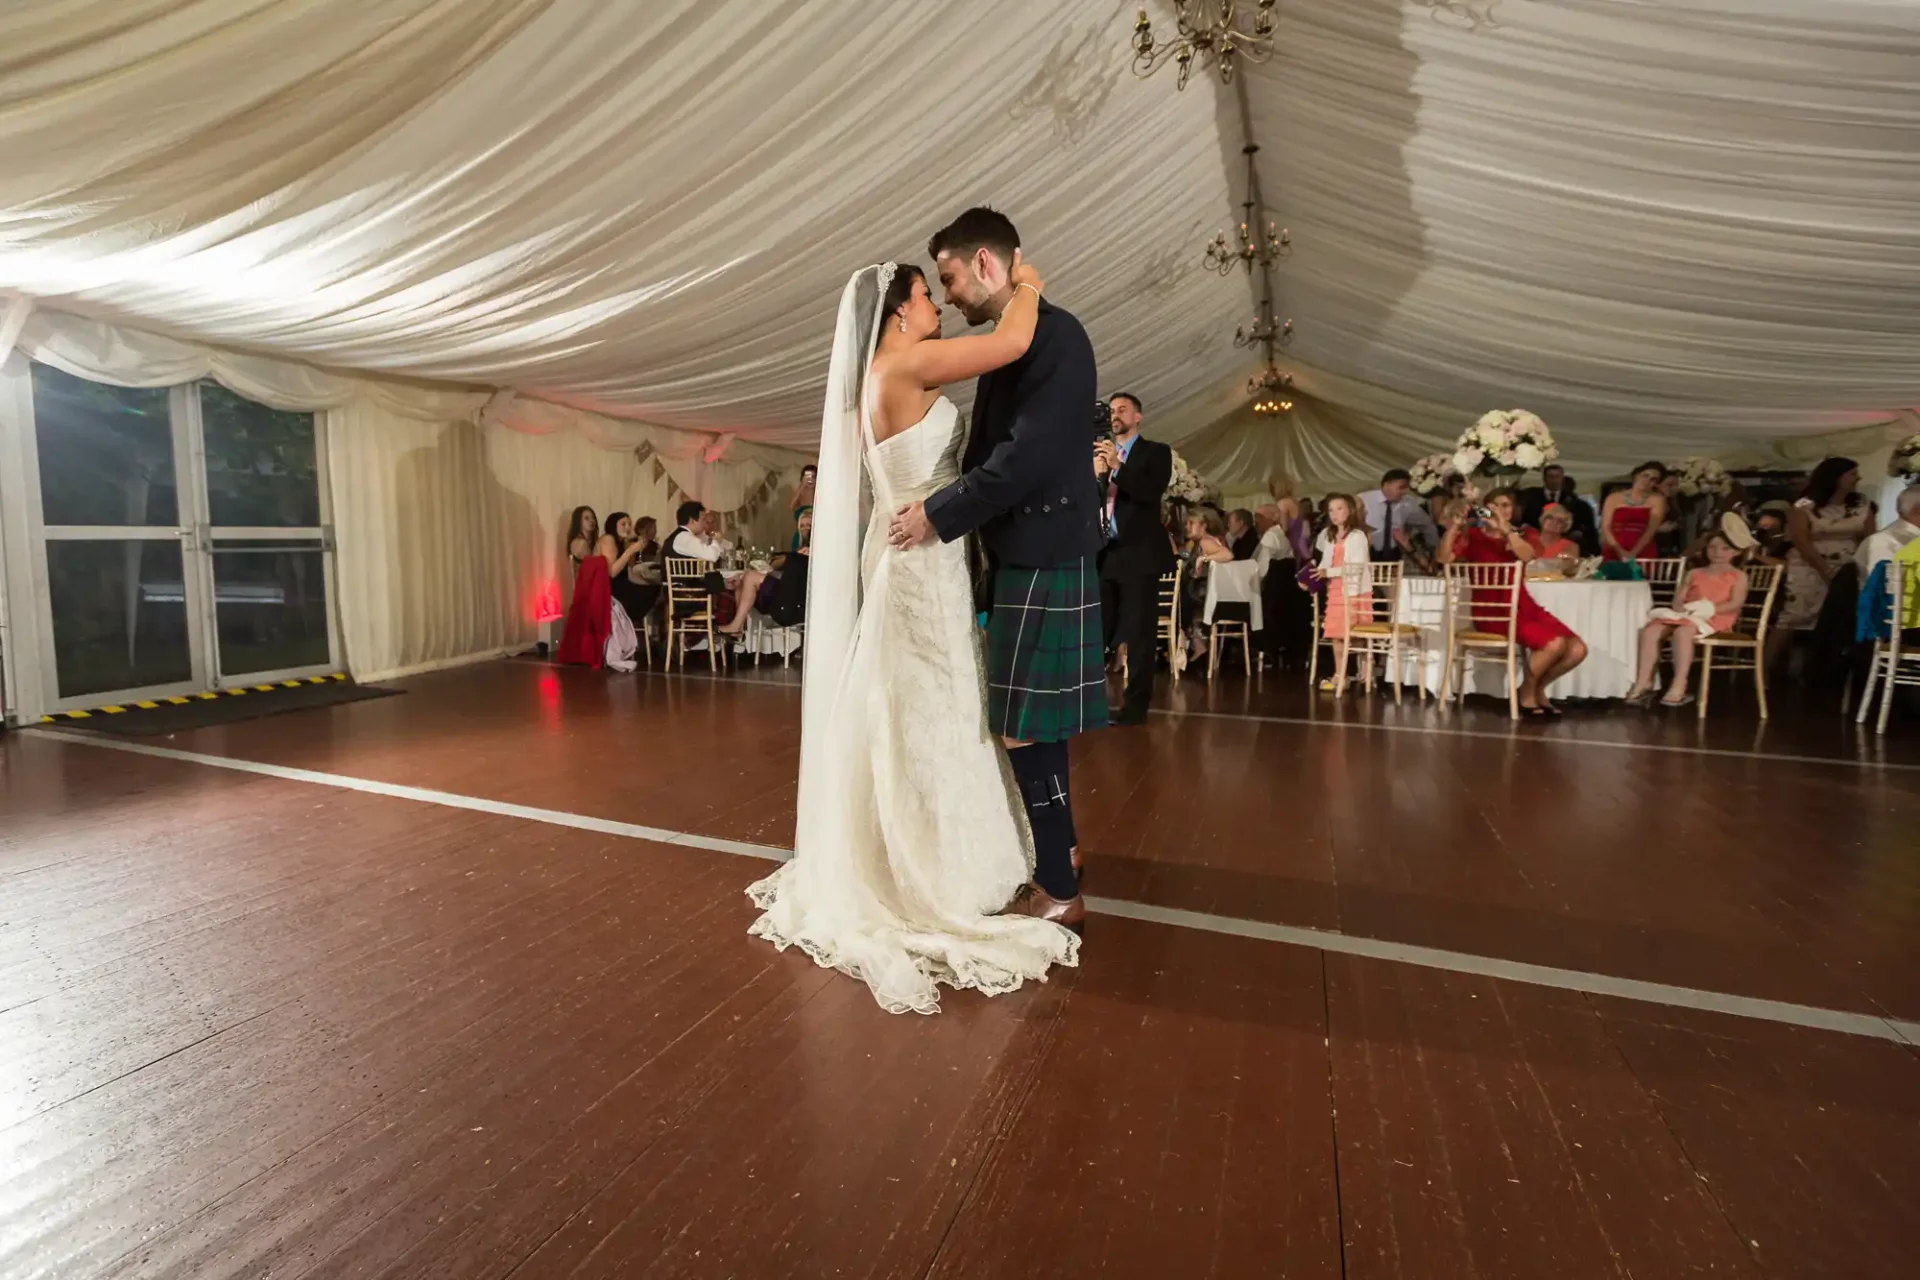 A bride and groom share a dance wearing wedding attire; the groom is in a kilt. guests seated around them in a tented venue.